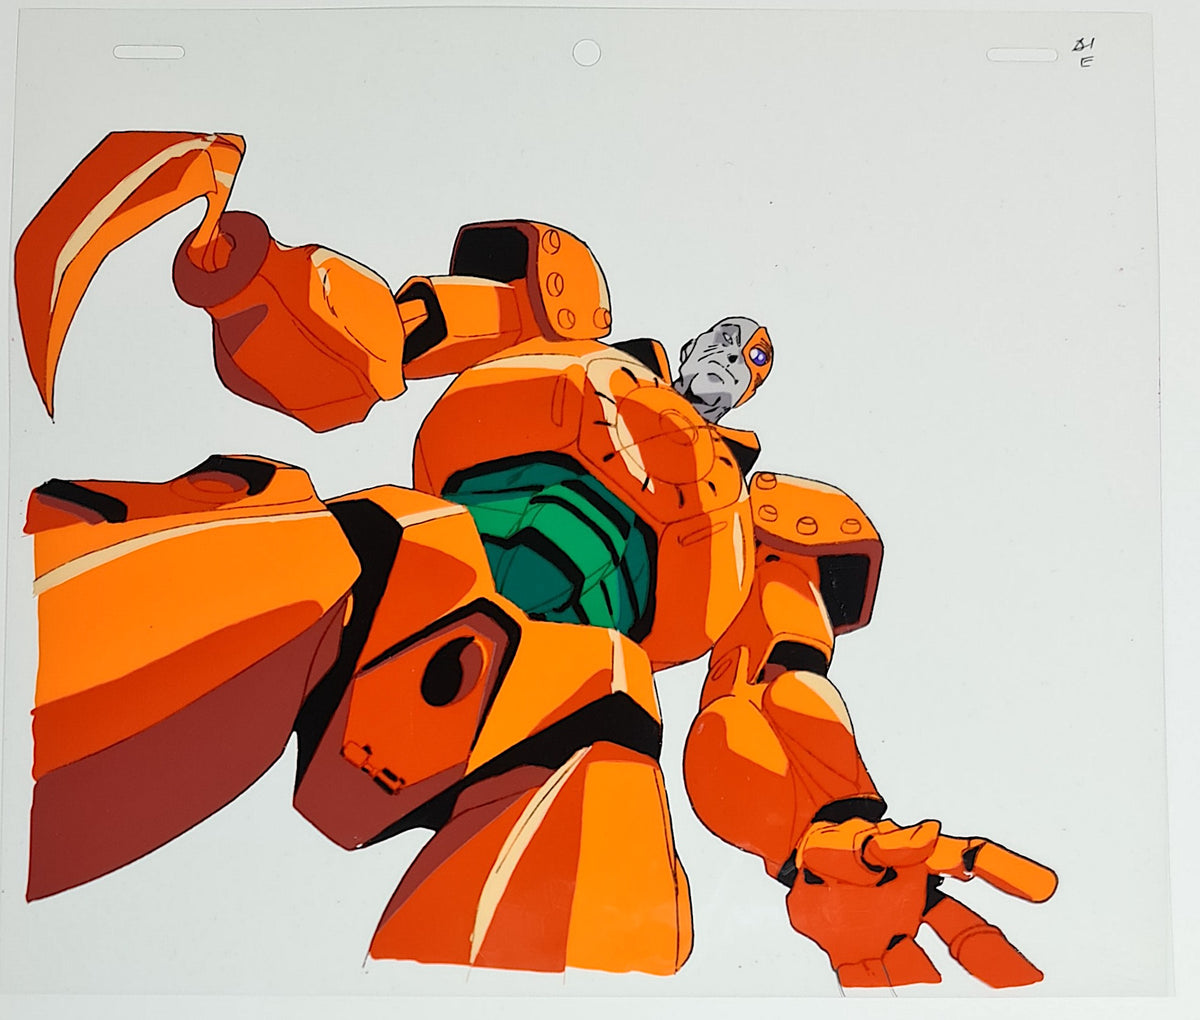 Transformers Beast Wars Neo Production Animation Cel - 3115